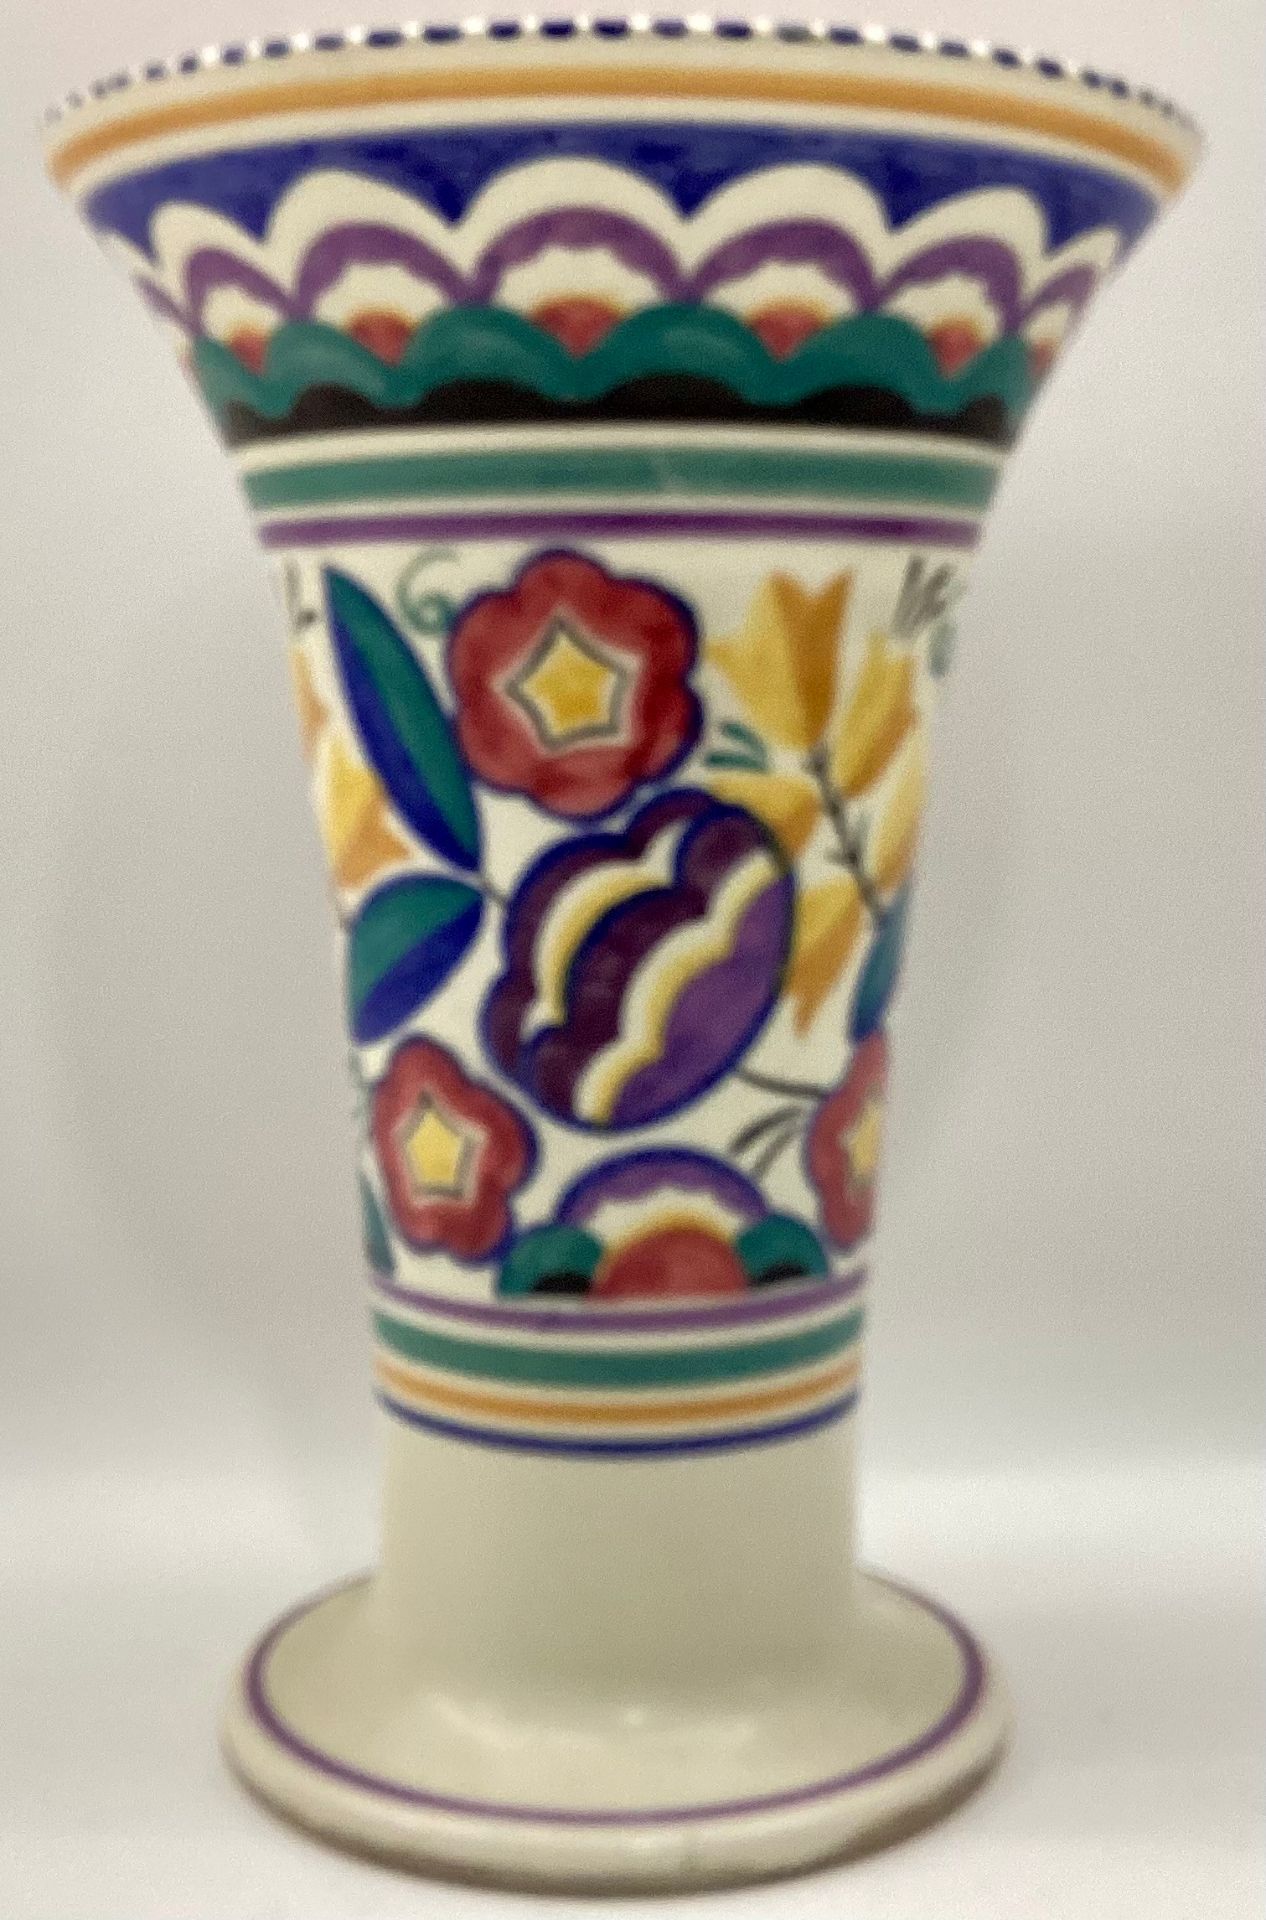 Poole Pottery shape 598 YW pattern large trumpet vase by Clarice Heath 9" high. - Image 3 of 5